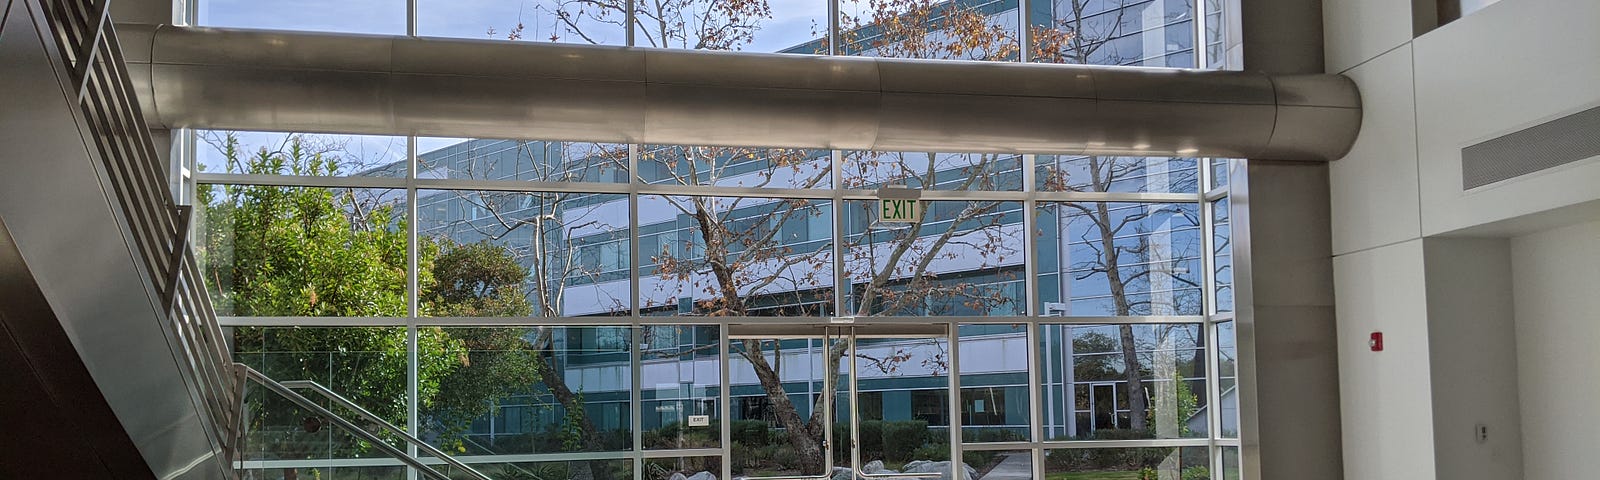 The building lobby at the Google San Diego office. A panel of glass windows overlooks the exterior of the corporate park.